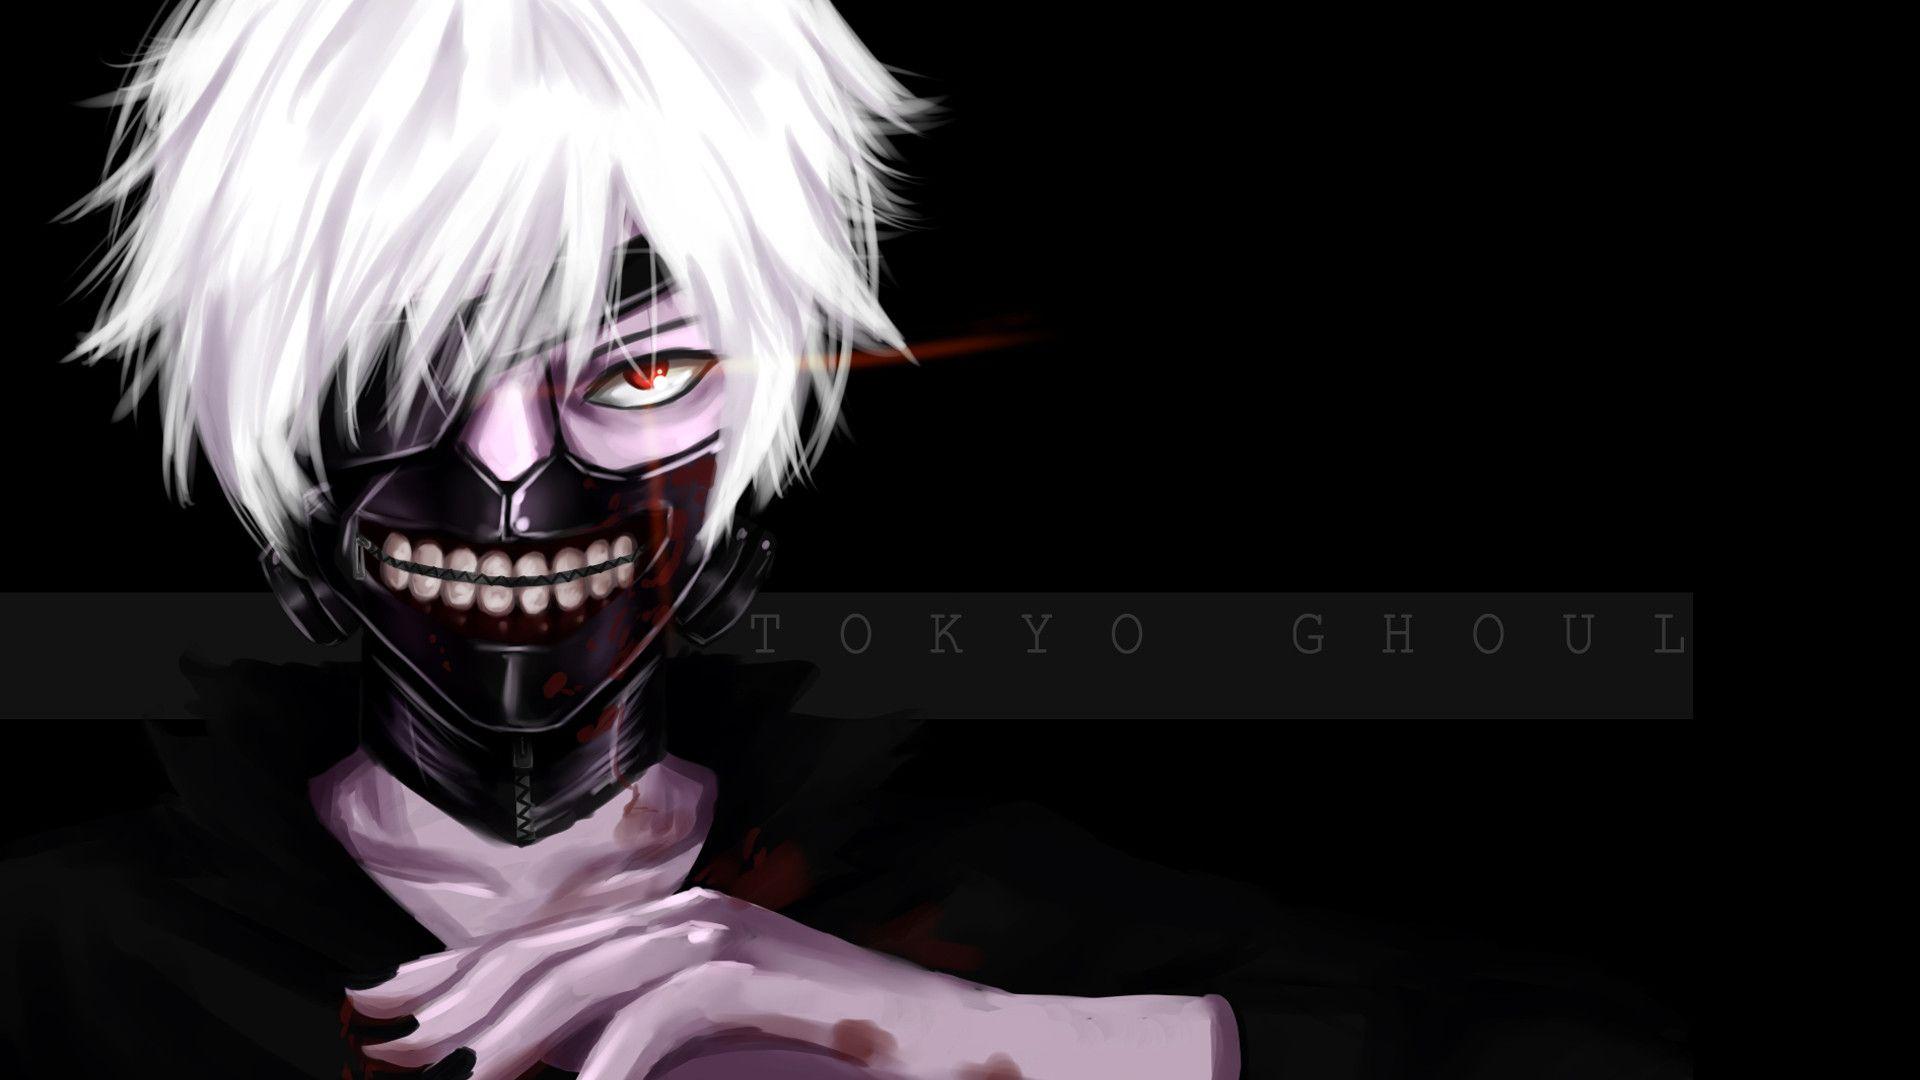 Scary anime boys Wallpapers Download | MobCup